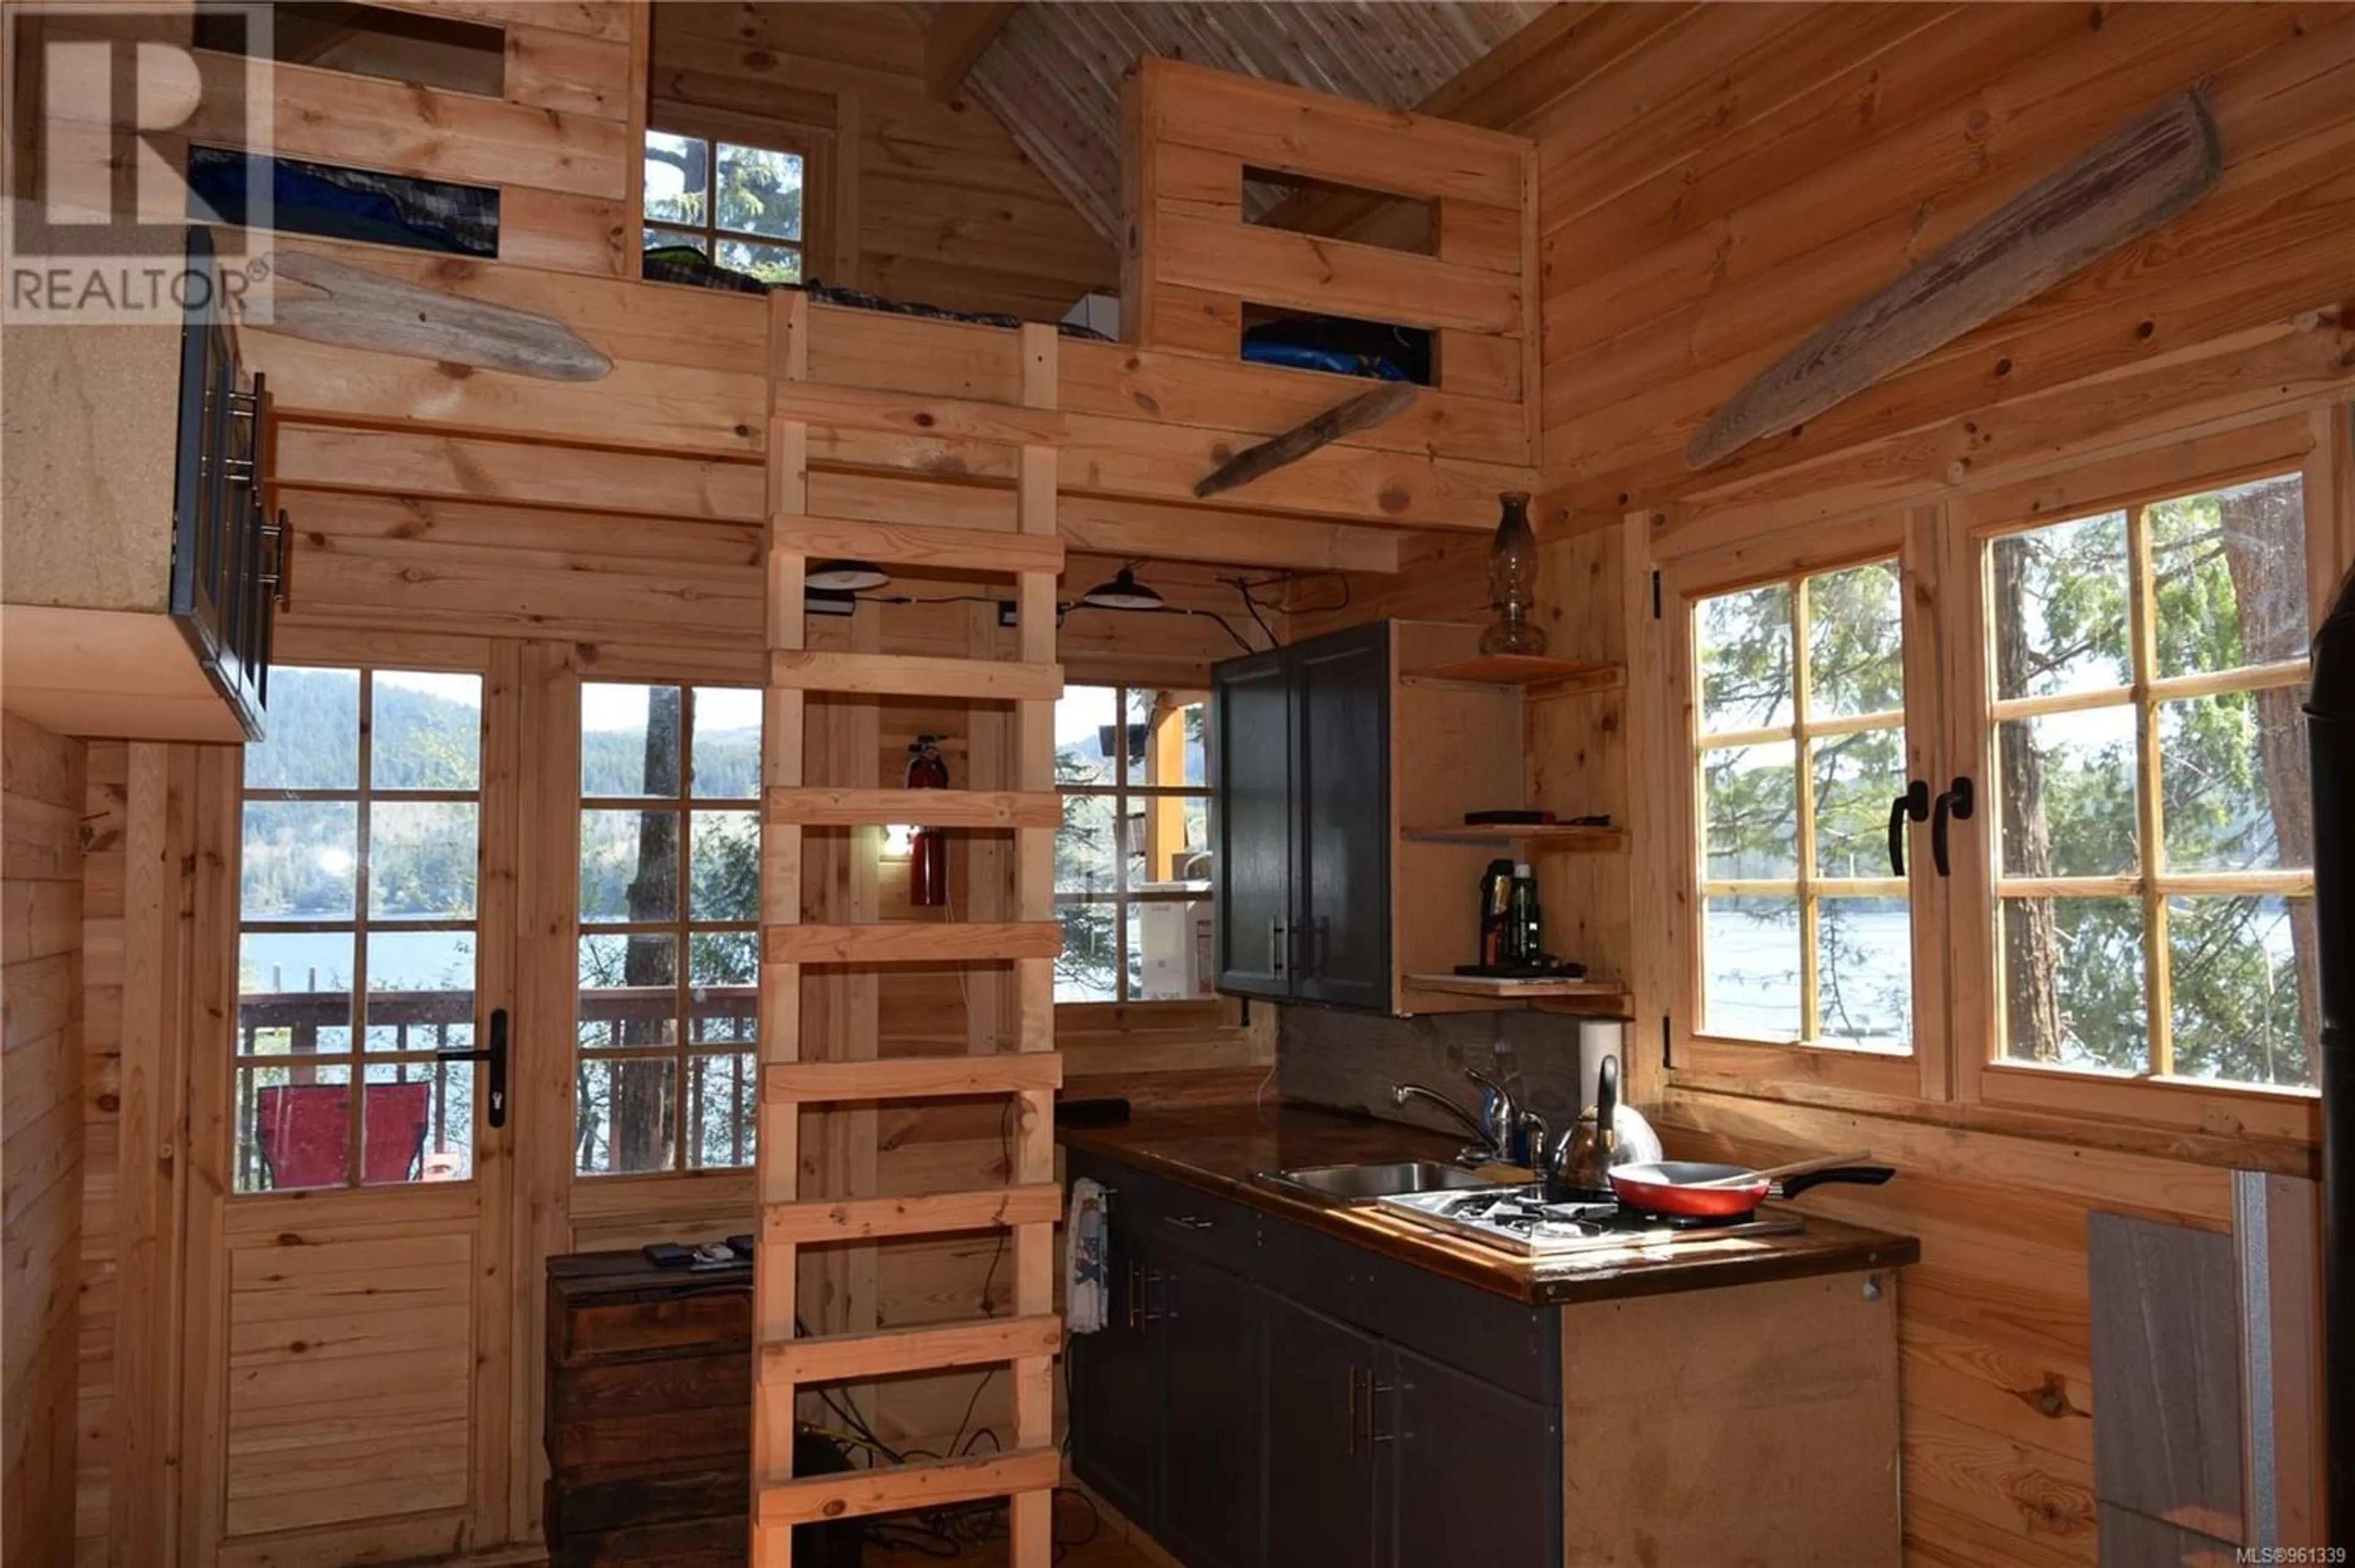 Rustic kitchen for LT 11 308 Winter Harbour Rd, Winter Harbour British Columbia V0N3L0